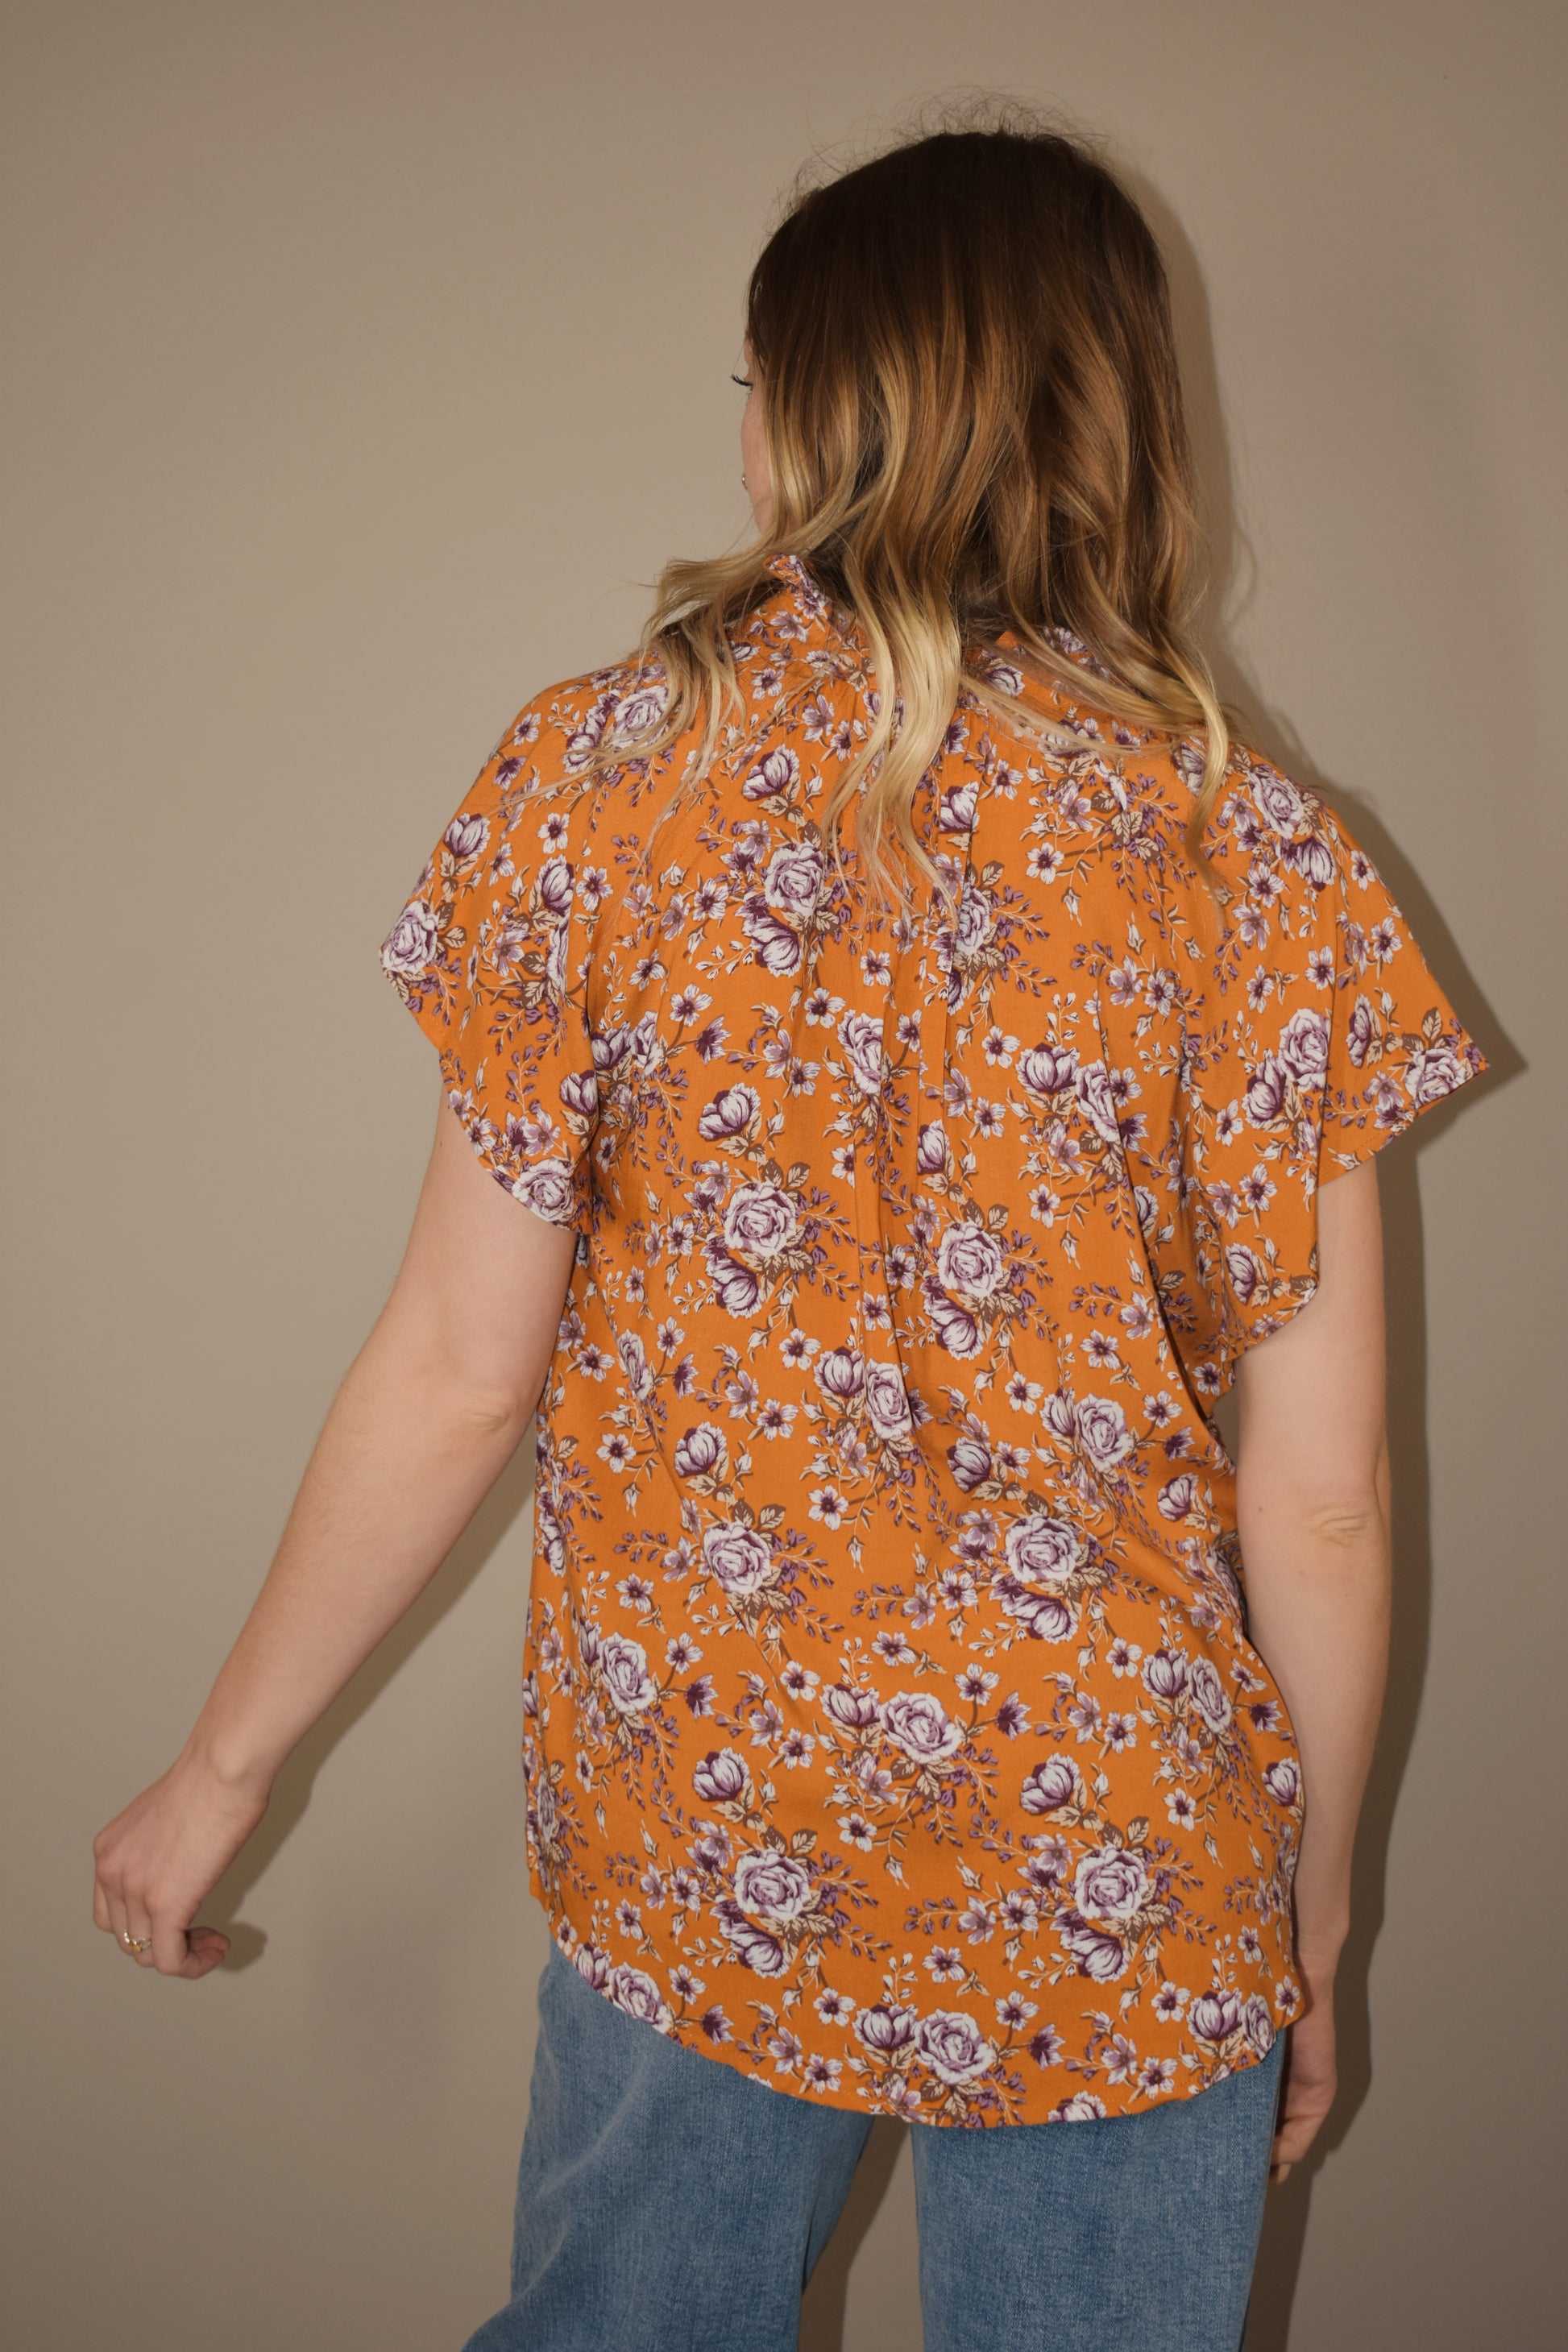 tangerine button down relaxed fit blouse with white and purple floral pattern. ruffle collar. flutter cap sleeves. full length